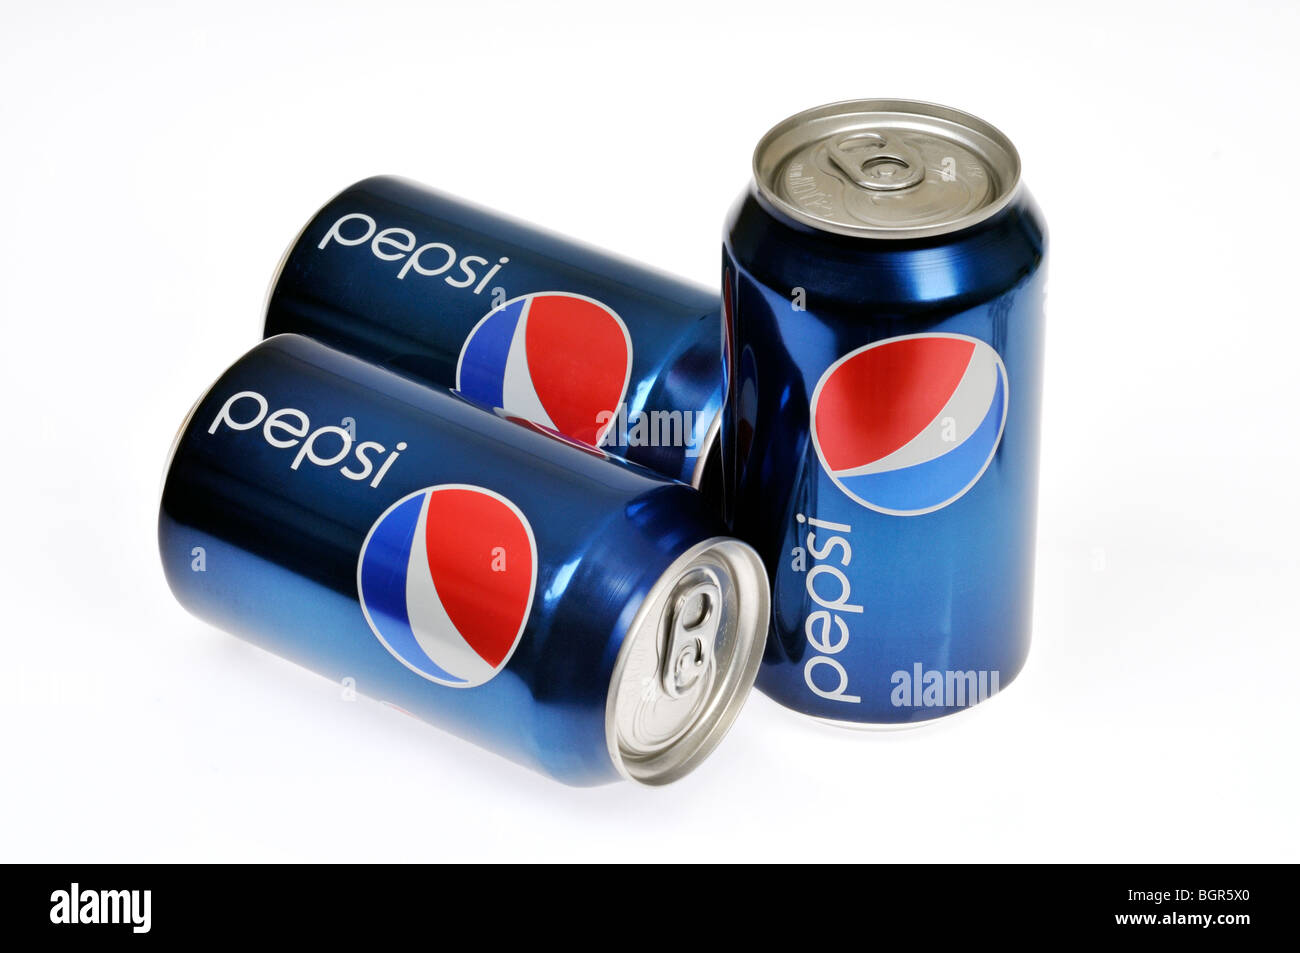 3 cans of Pepsi soft drink silhouetted on white background Stock Photo